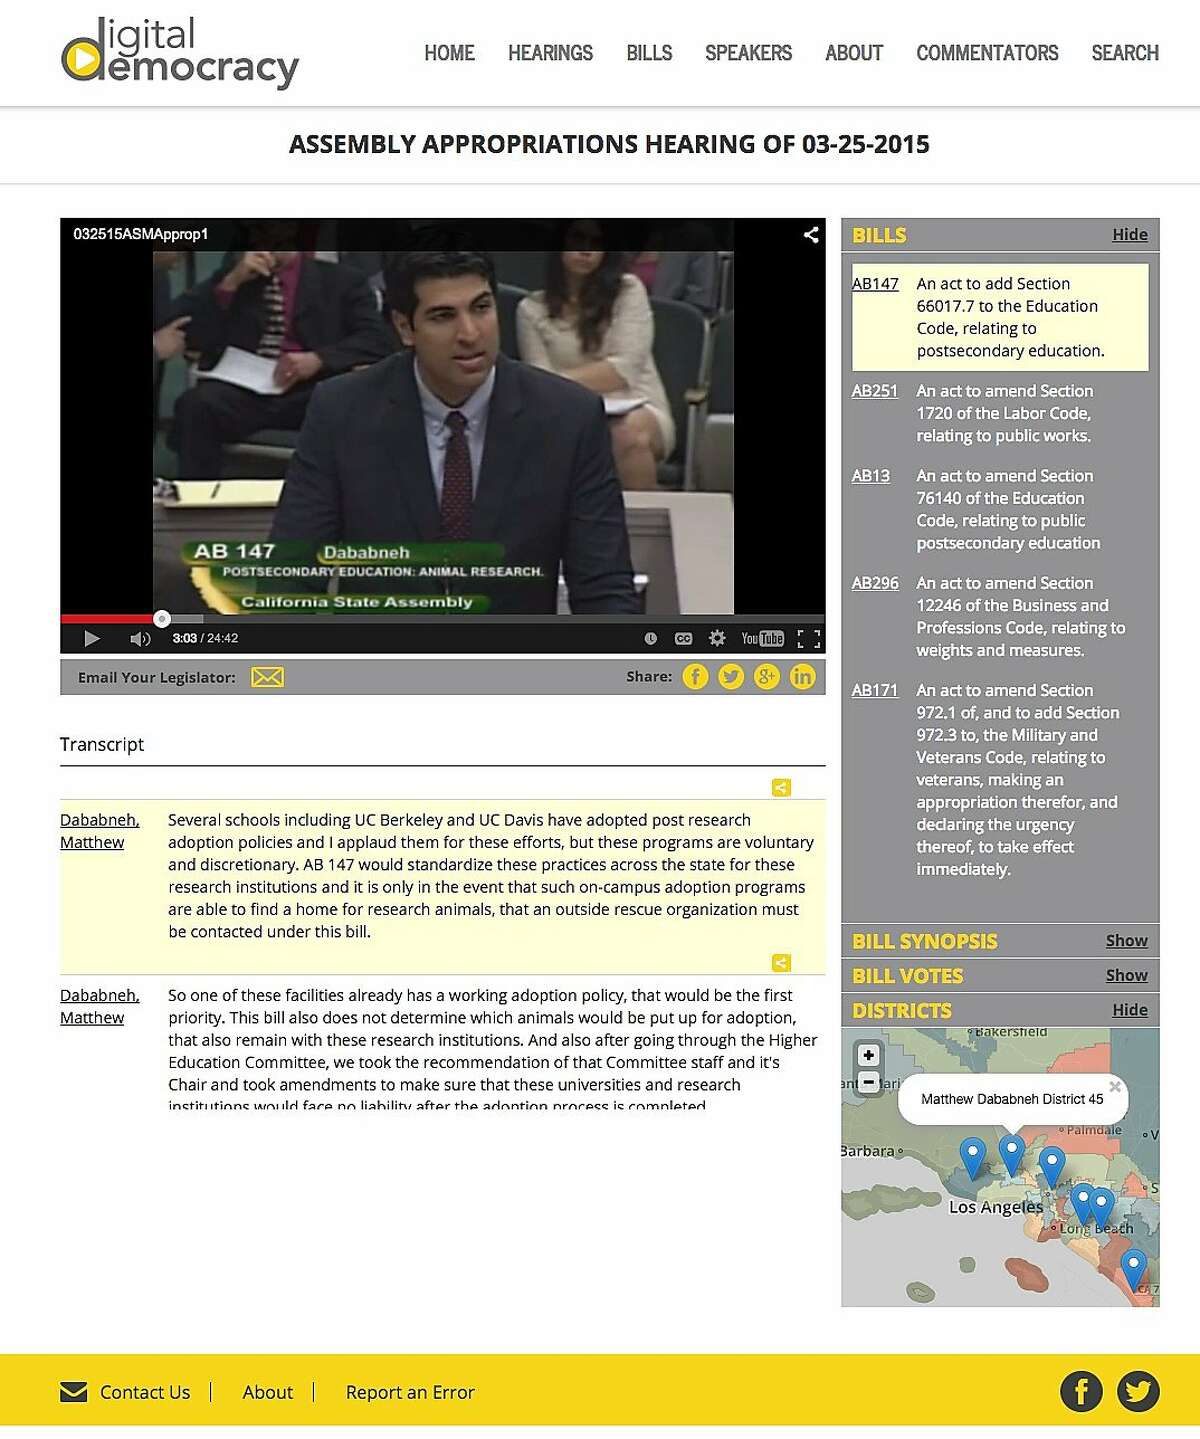 The Digital Democracy Project, www.digitaldemocracy.org, creates a searchable database of all state legislative hearings.